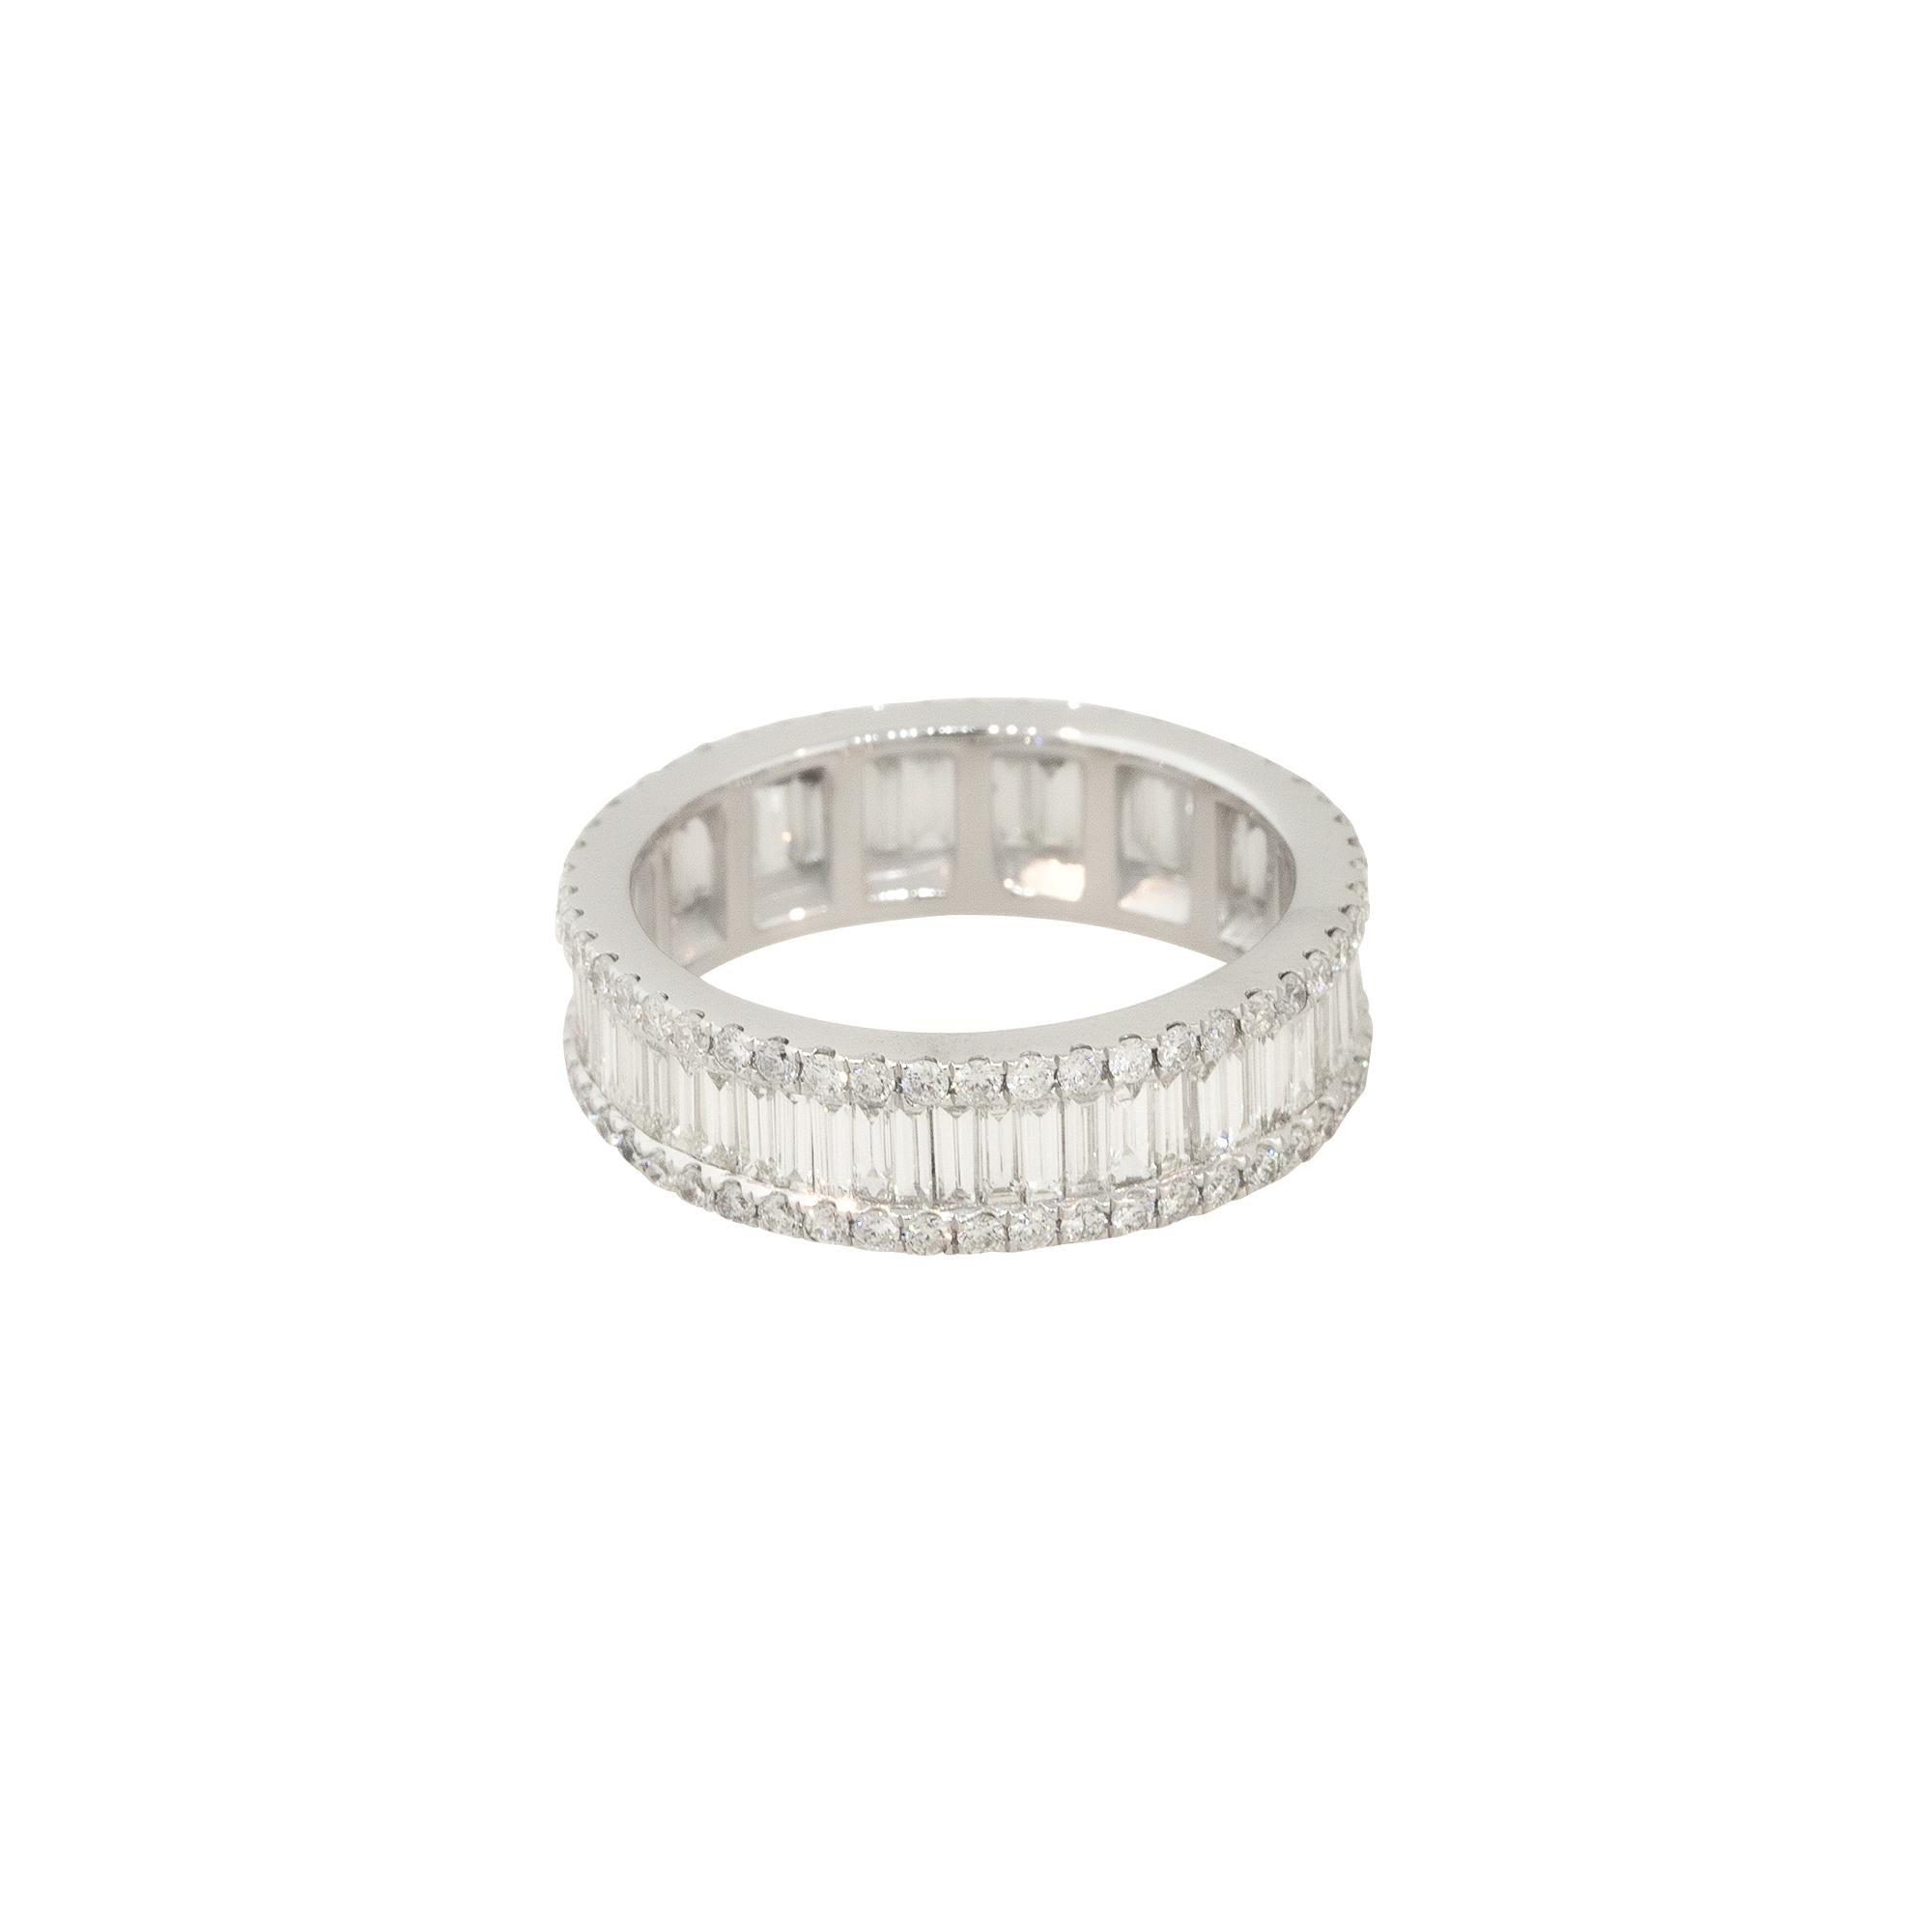 14k White Gold 3.40ctw Baguette and Round Brilliant Cut  Diamond Eternity Band

Style: Women's Diamond Eternity Band
Material: 14k White Gold
Diamond Details: Approximately 3.40ctw of Baguette Cut and Round Brilliant Cut Diamonds. Round Diamonds are